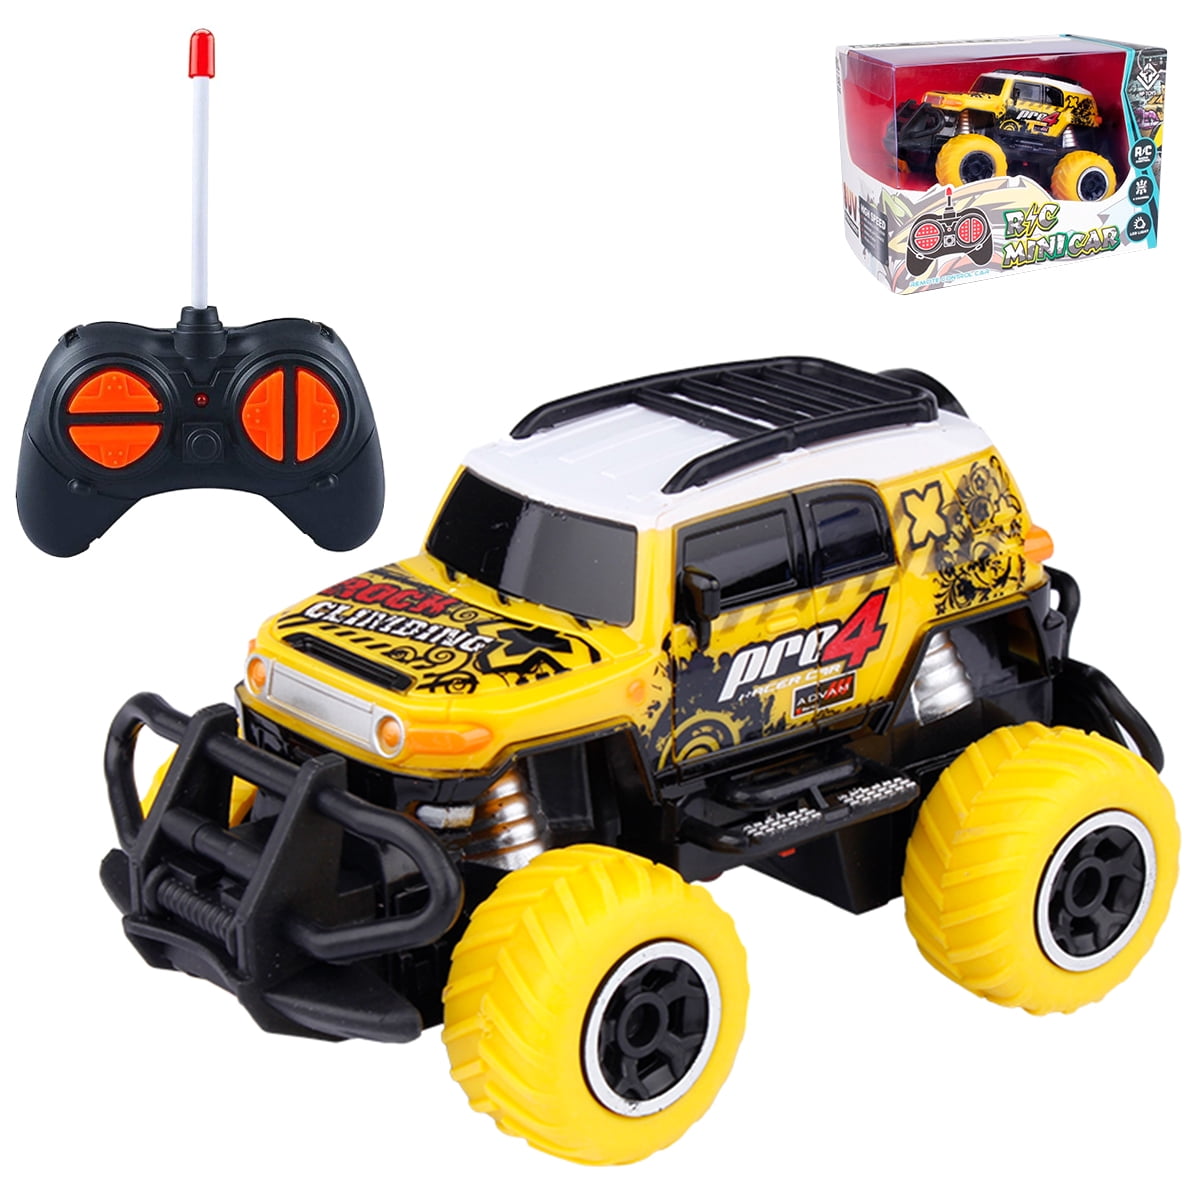 LOFEE New Upgrade Off-Road RC Car Toy for Kids 1:43 Remote Control Car Toy Best Present 